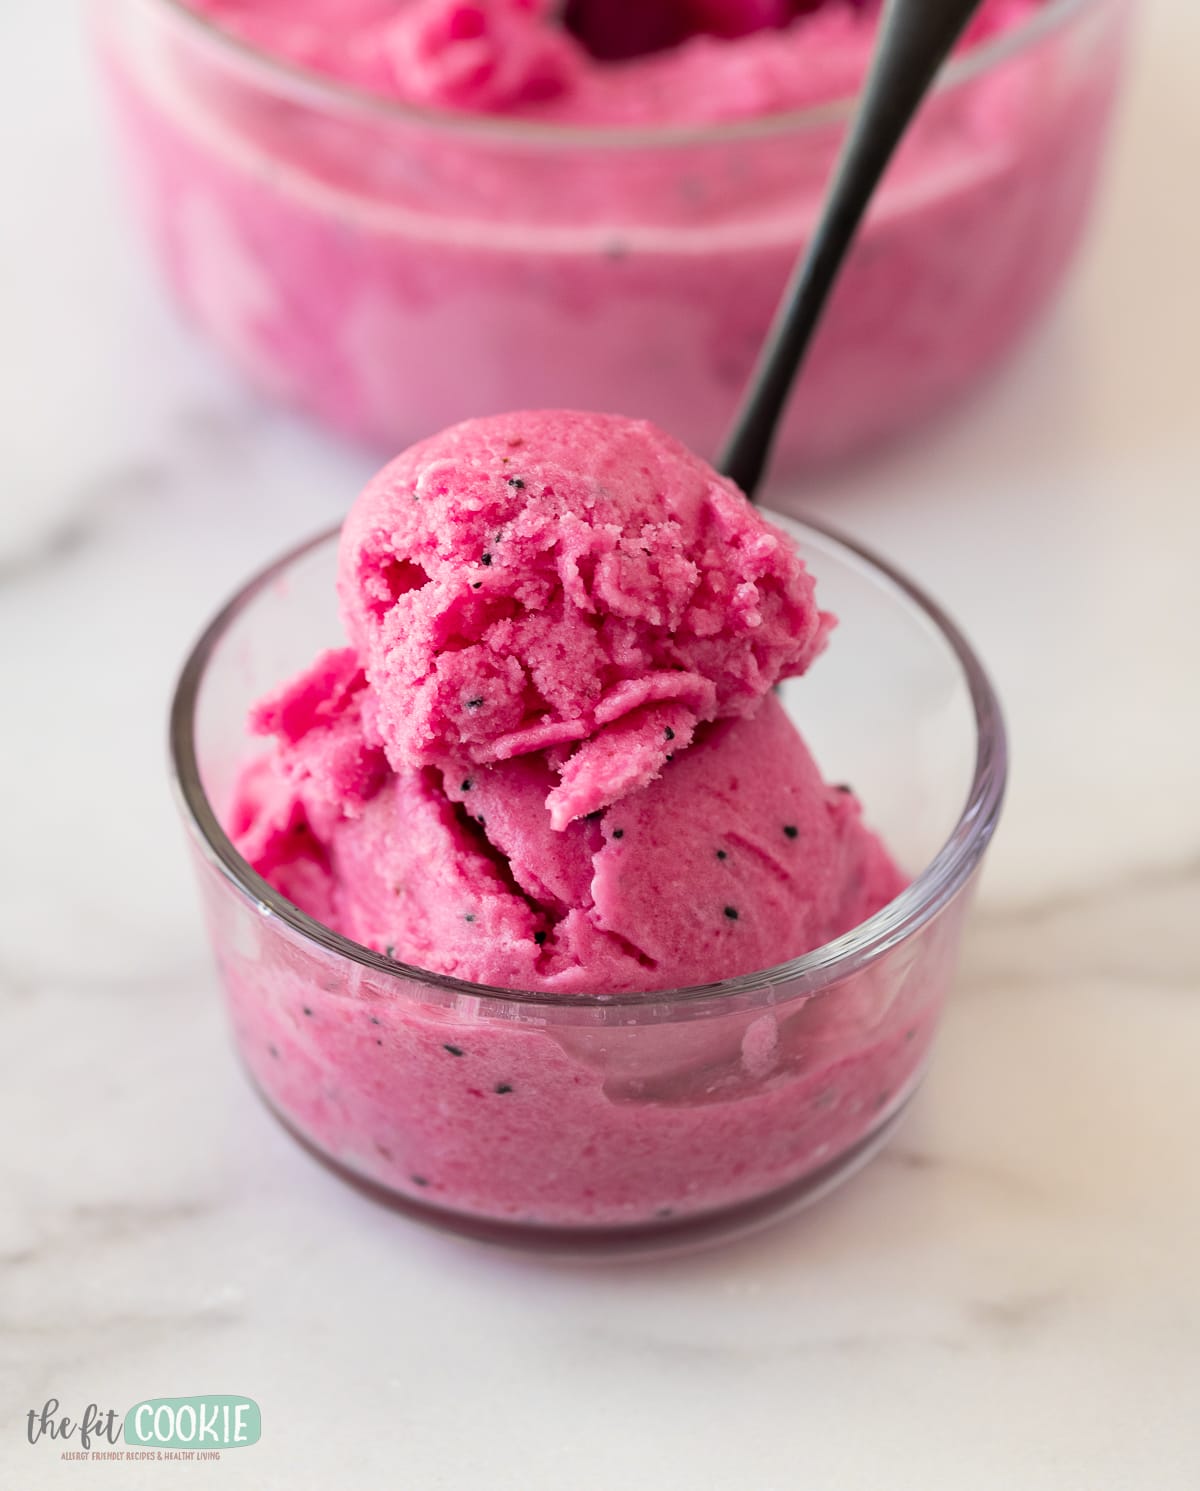 Free: Pink ice cream scoops in glass bowl Free Photo 